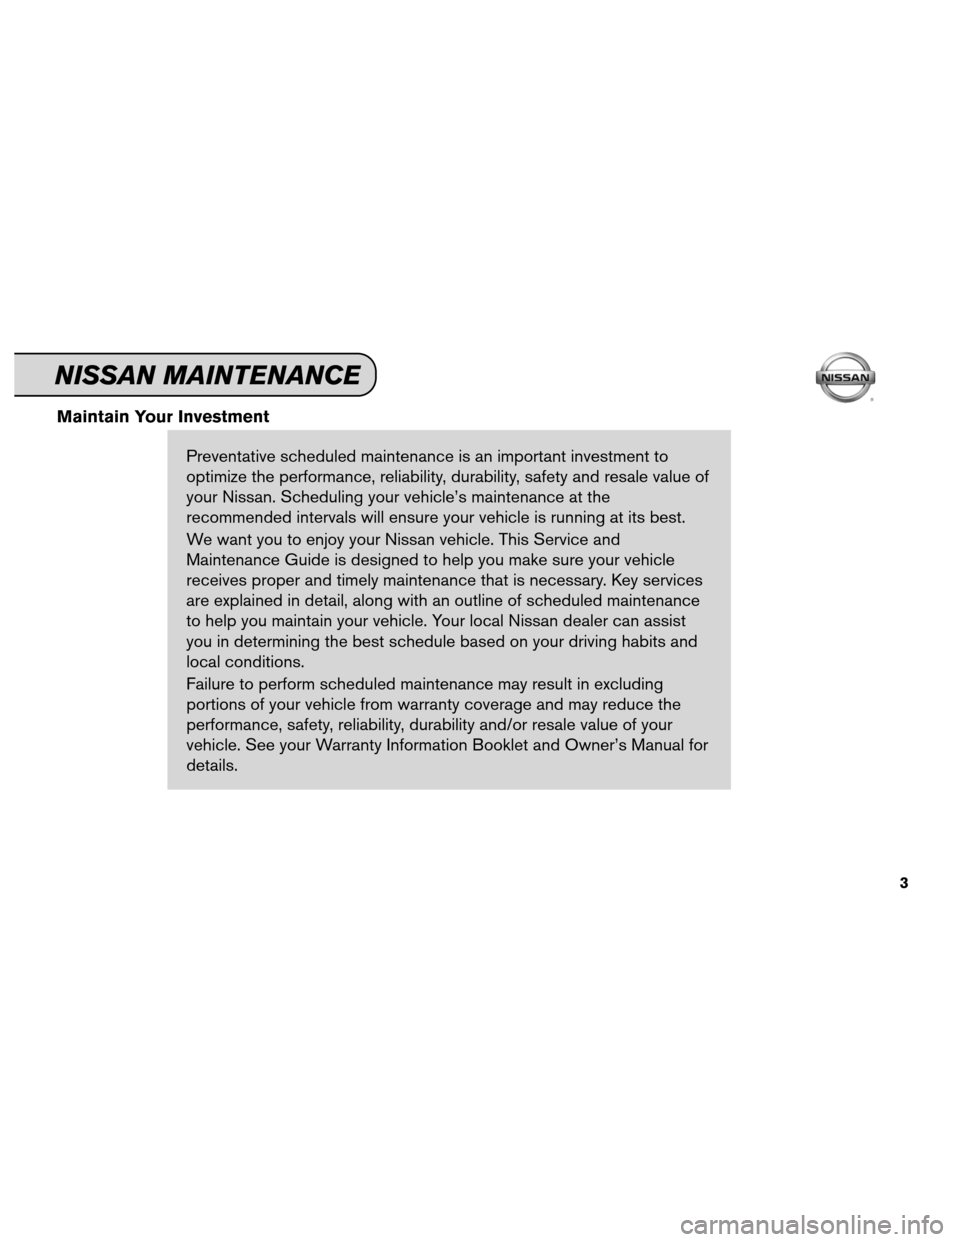 NISSAN MAXIMA 2012 A35 / 7.G Service And Maintenance Guide Maintain Your InvestmentPreventative scheduled maintenance is an important investment to
optimize the performance, reliability, durability, safety and resale value of
your Nissan. Scheduling your vehi